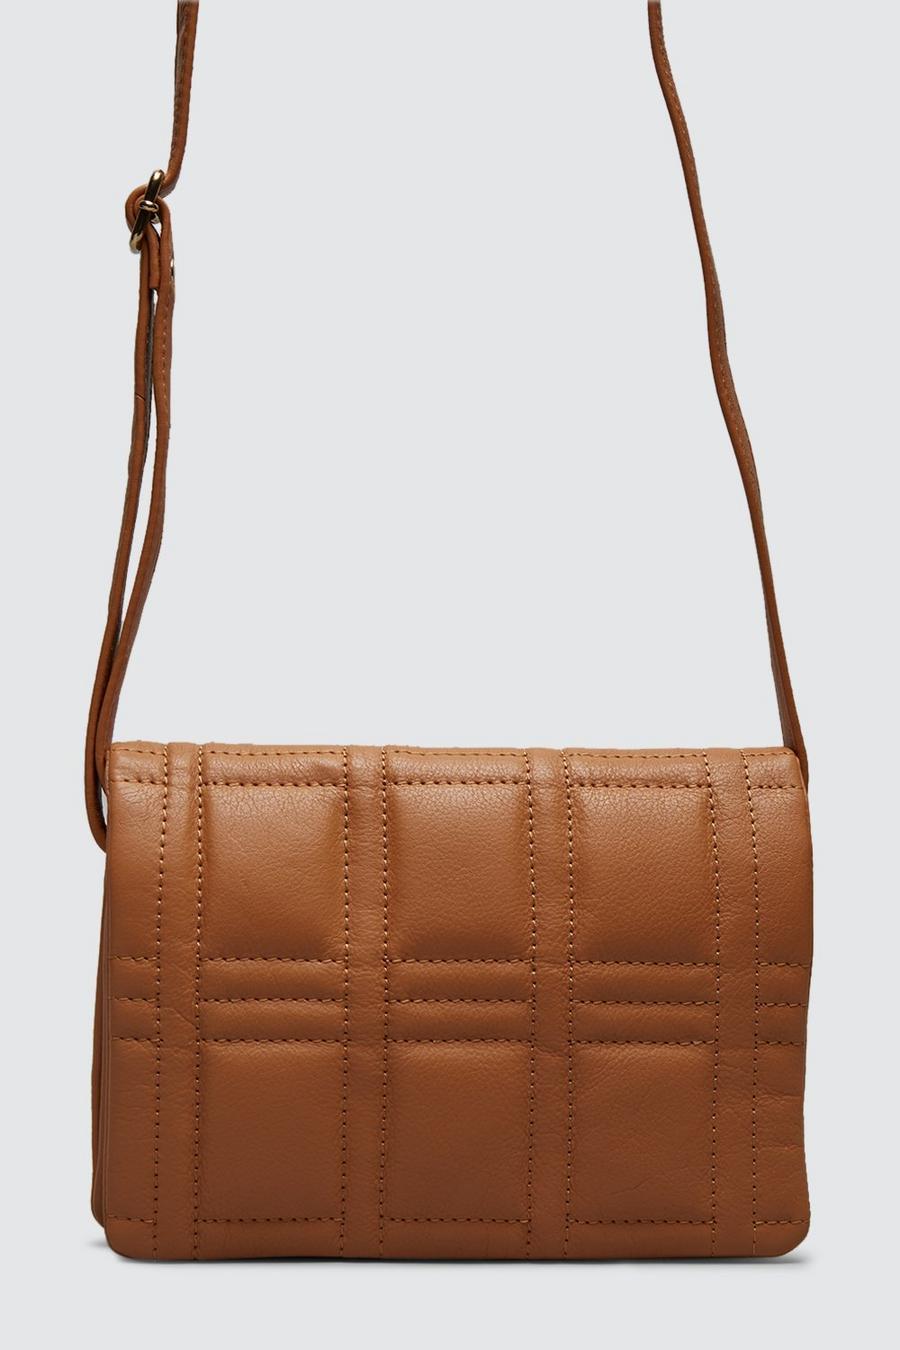 Real Leather Quilted Cross Body